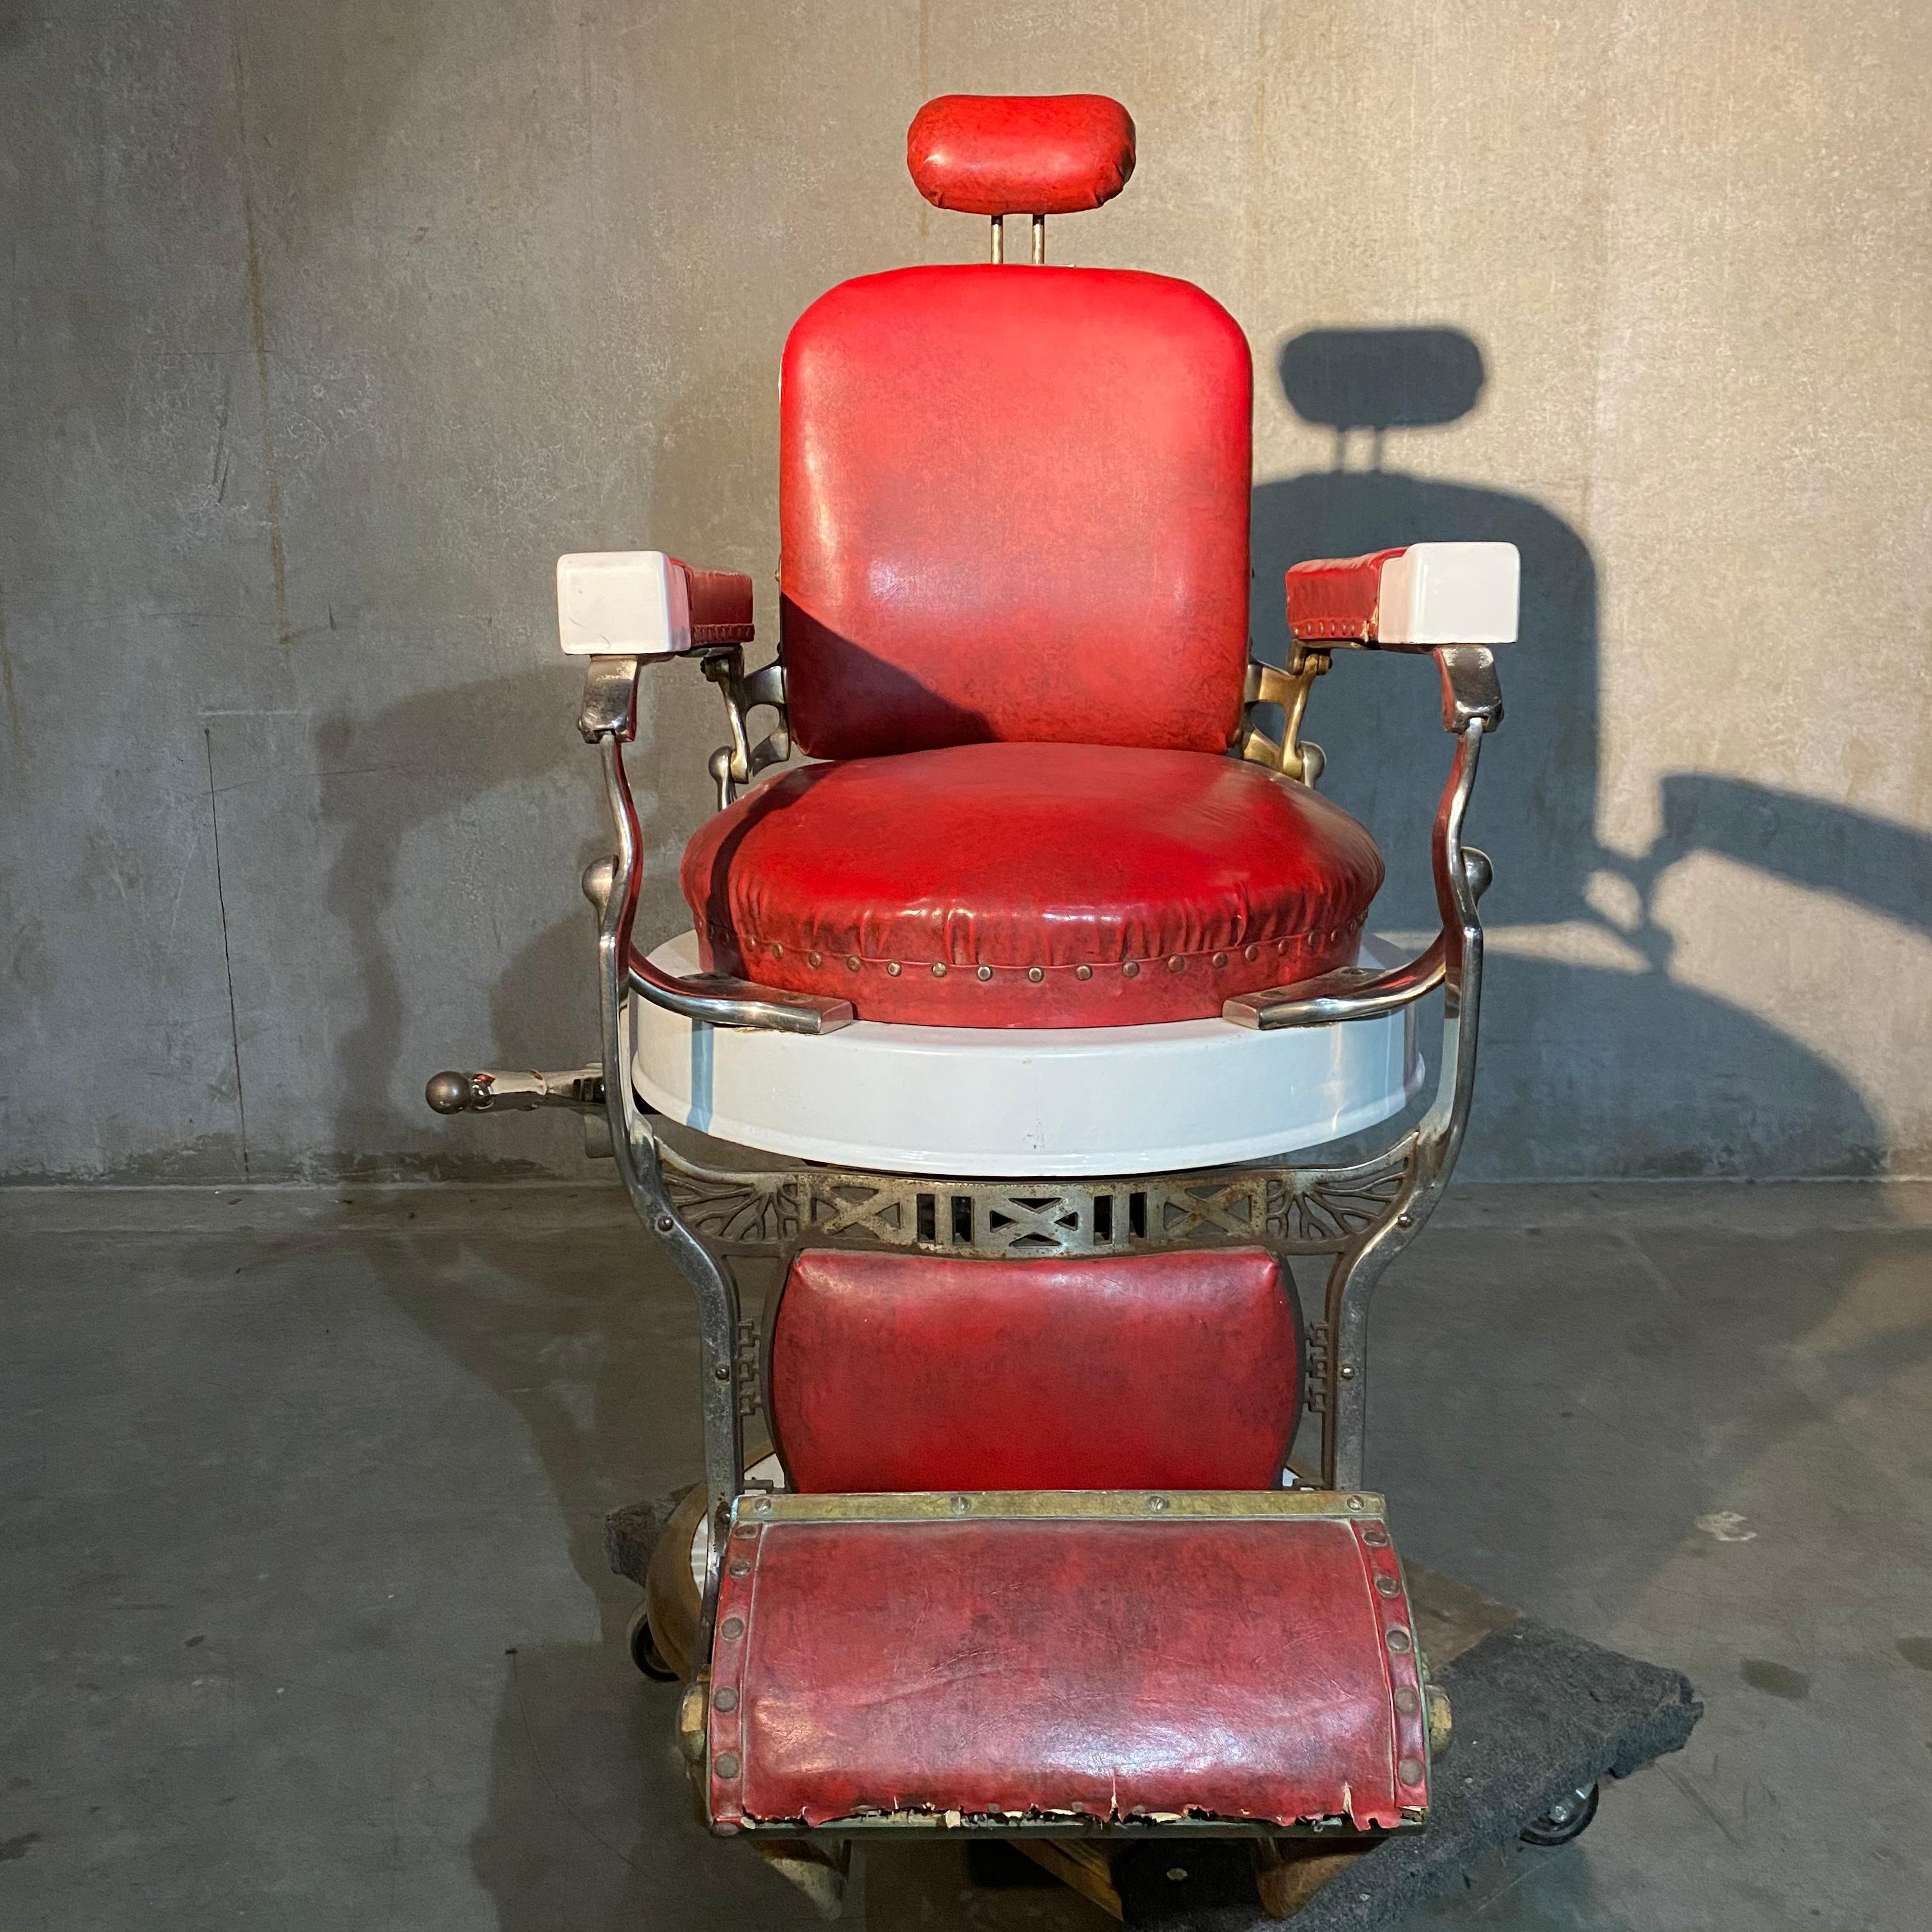 A very good original barber chair with adjustable lever, brass details and complete original condition.

This is a rare model.